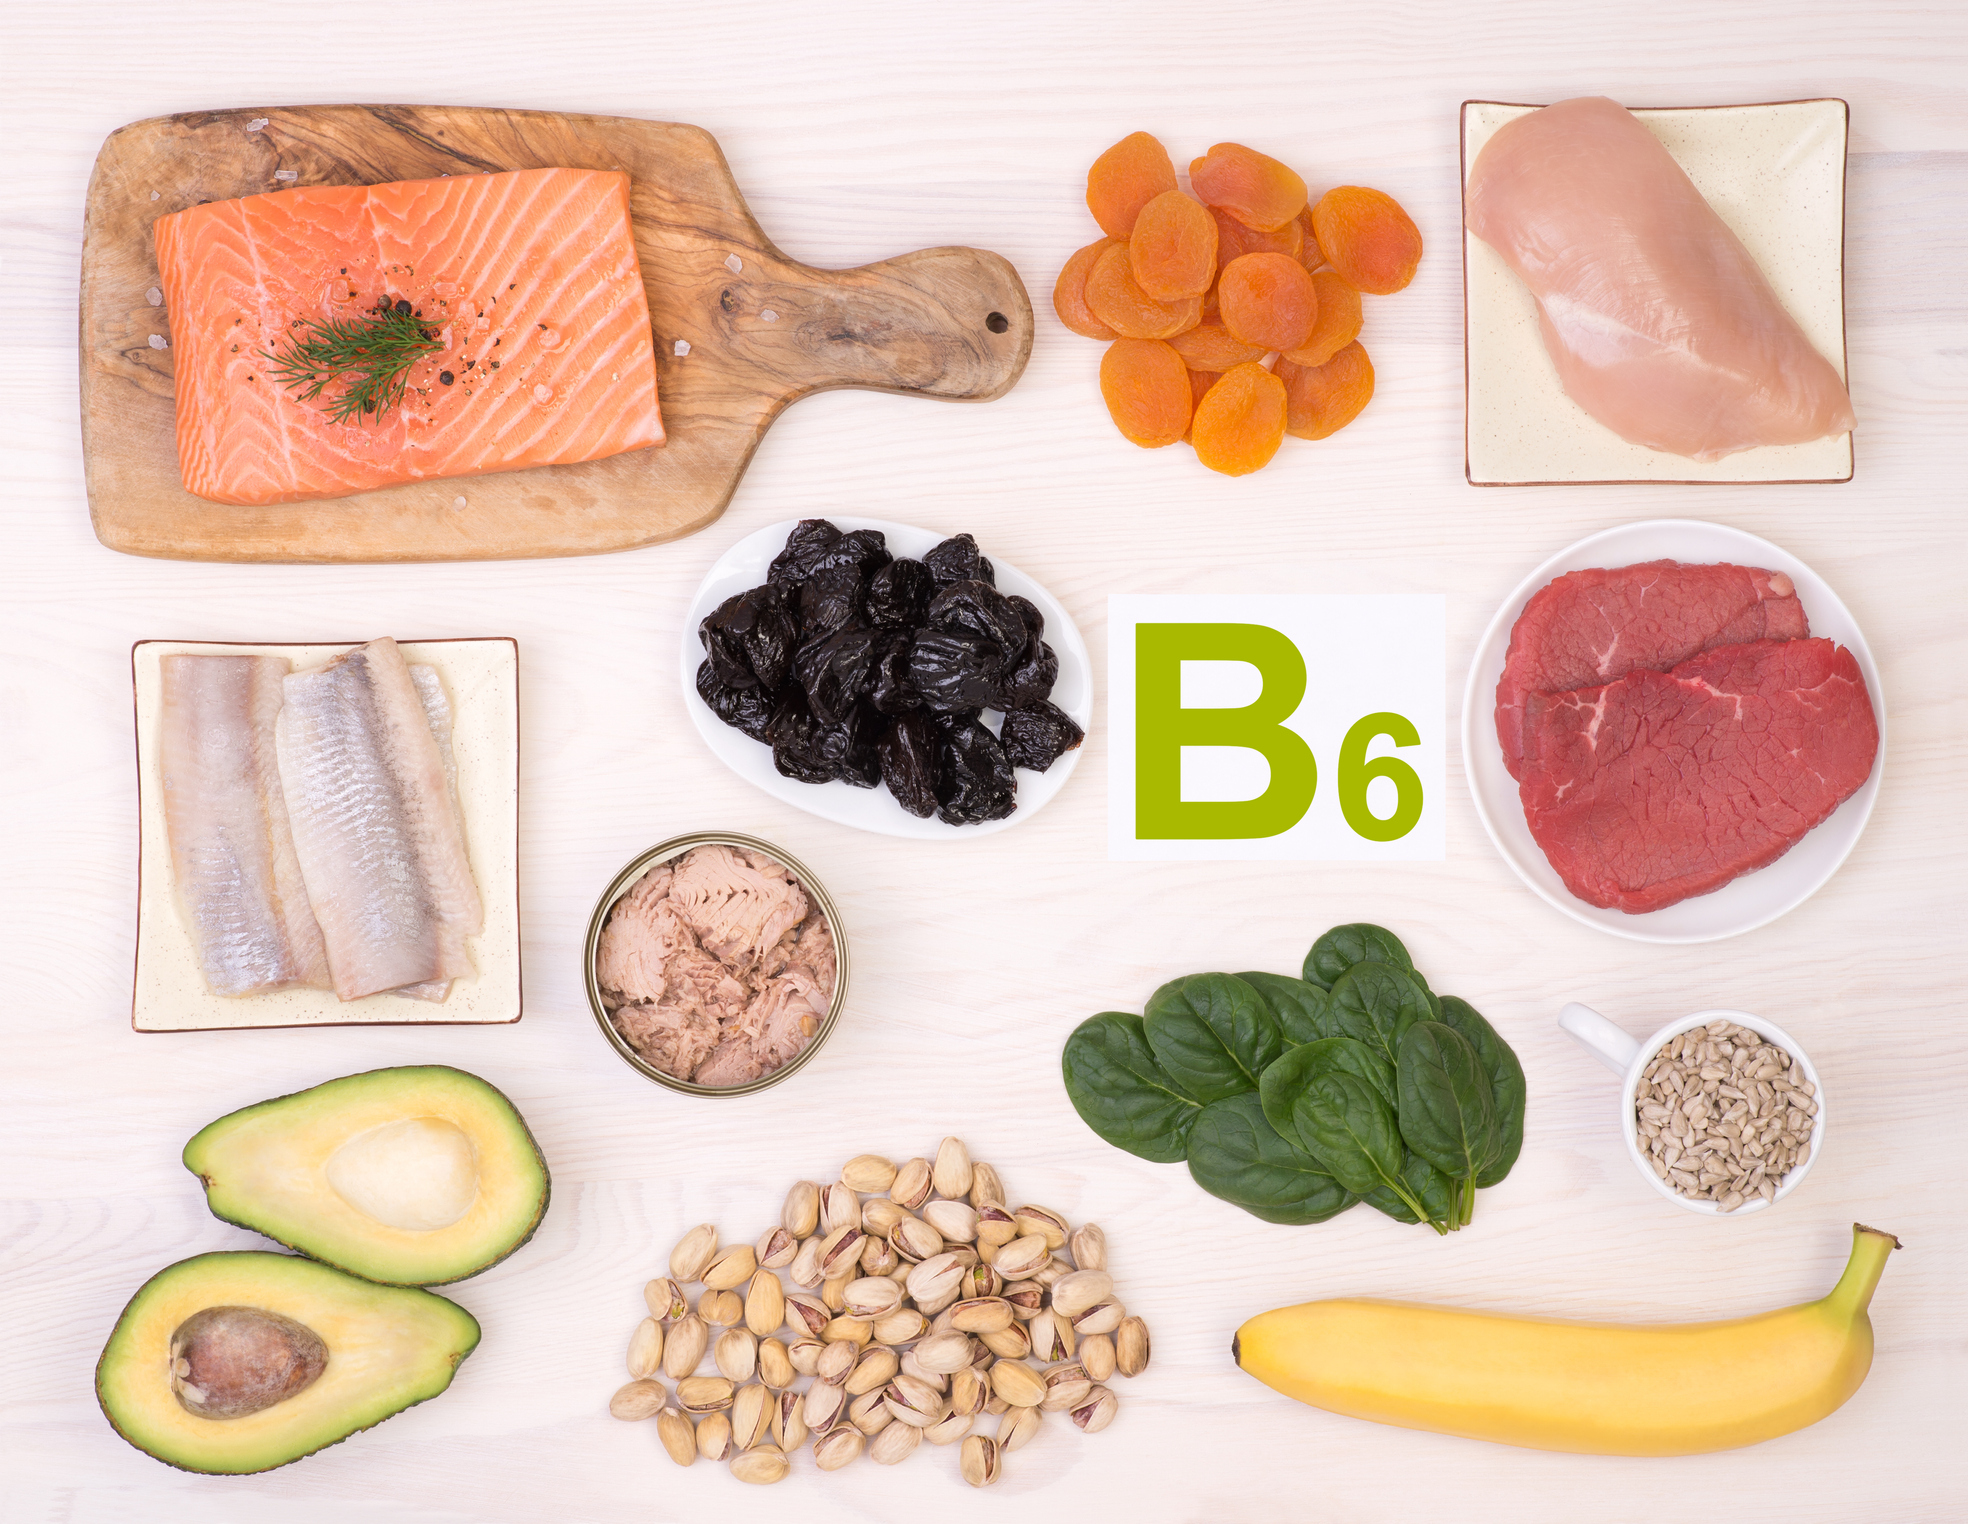 Sources of vitamin B6